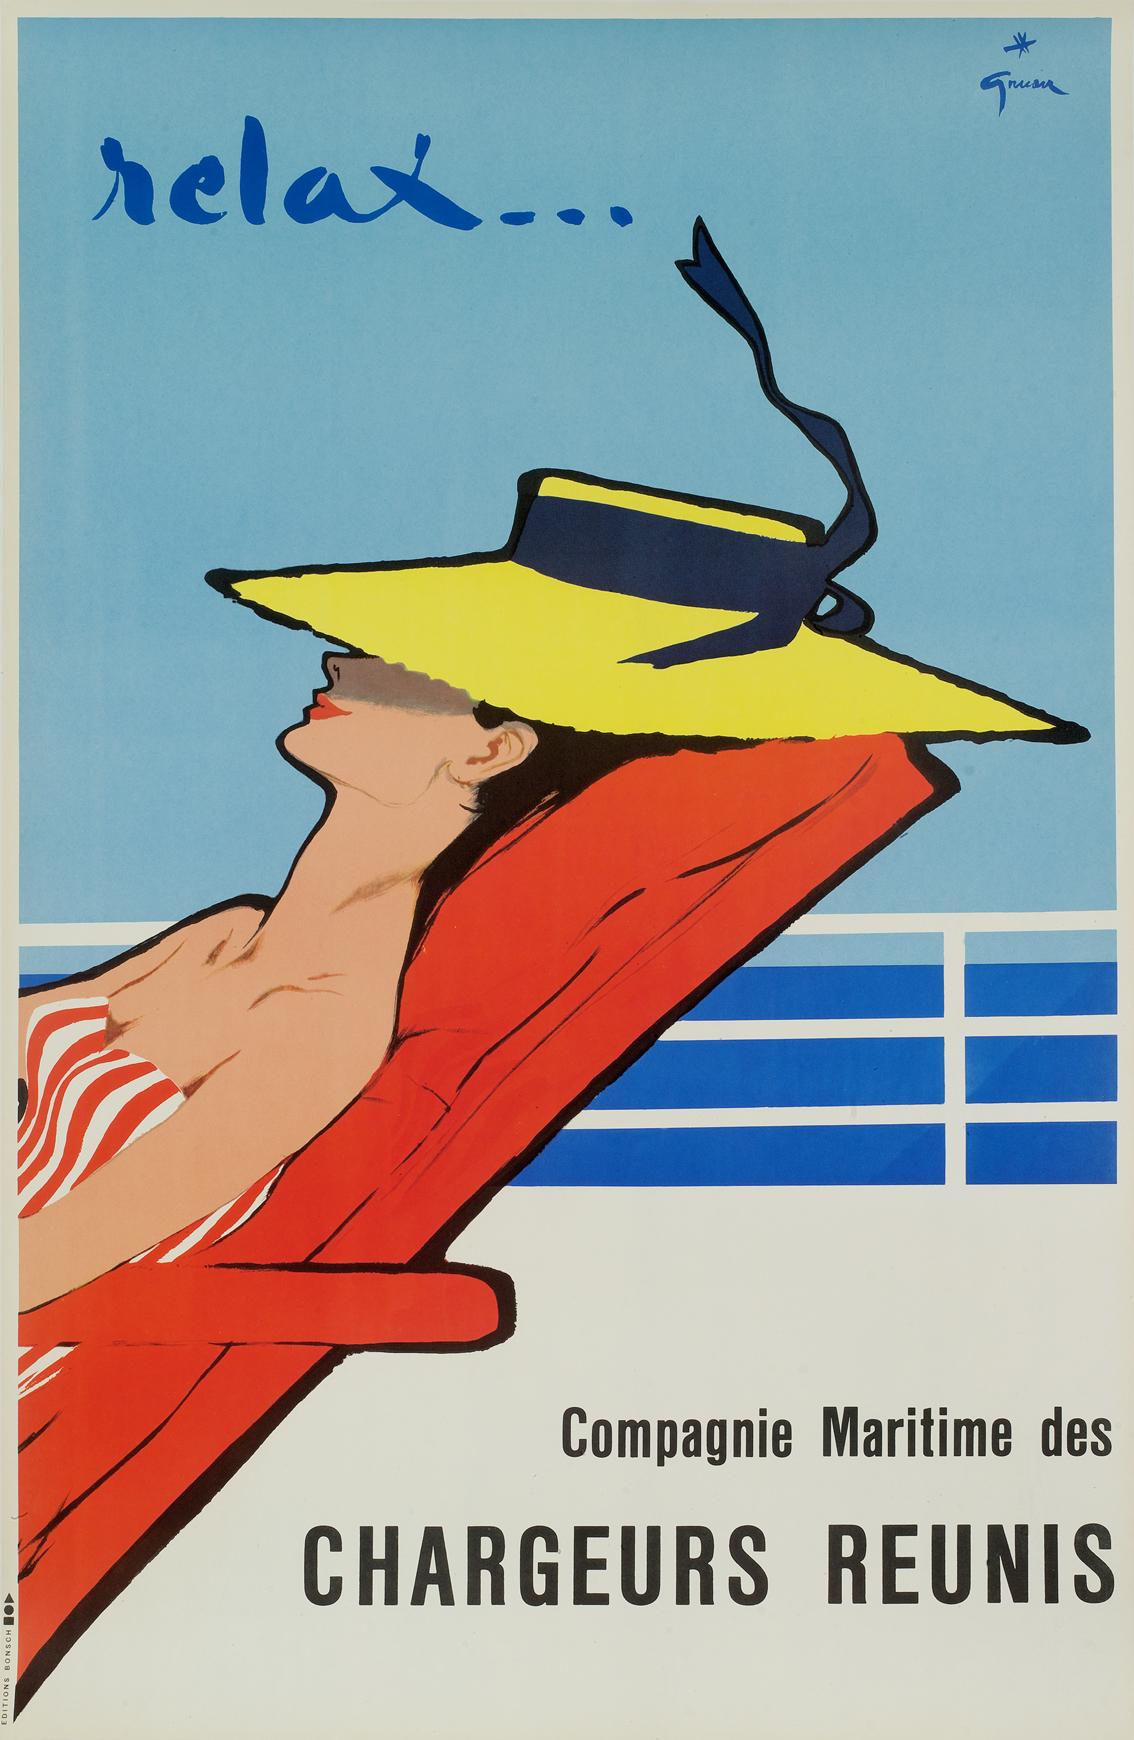 French Gruau, Original Vintage Poster, Relax, Chargeurs Reunis, Boat, Ship, Woman 1954